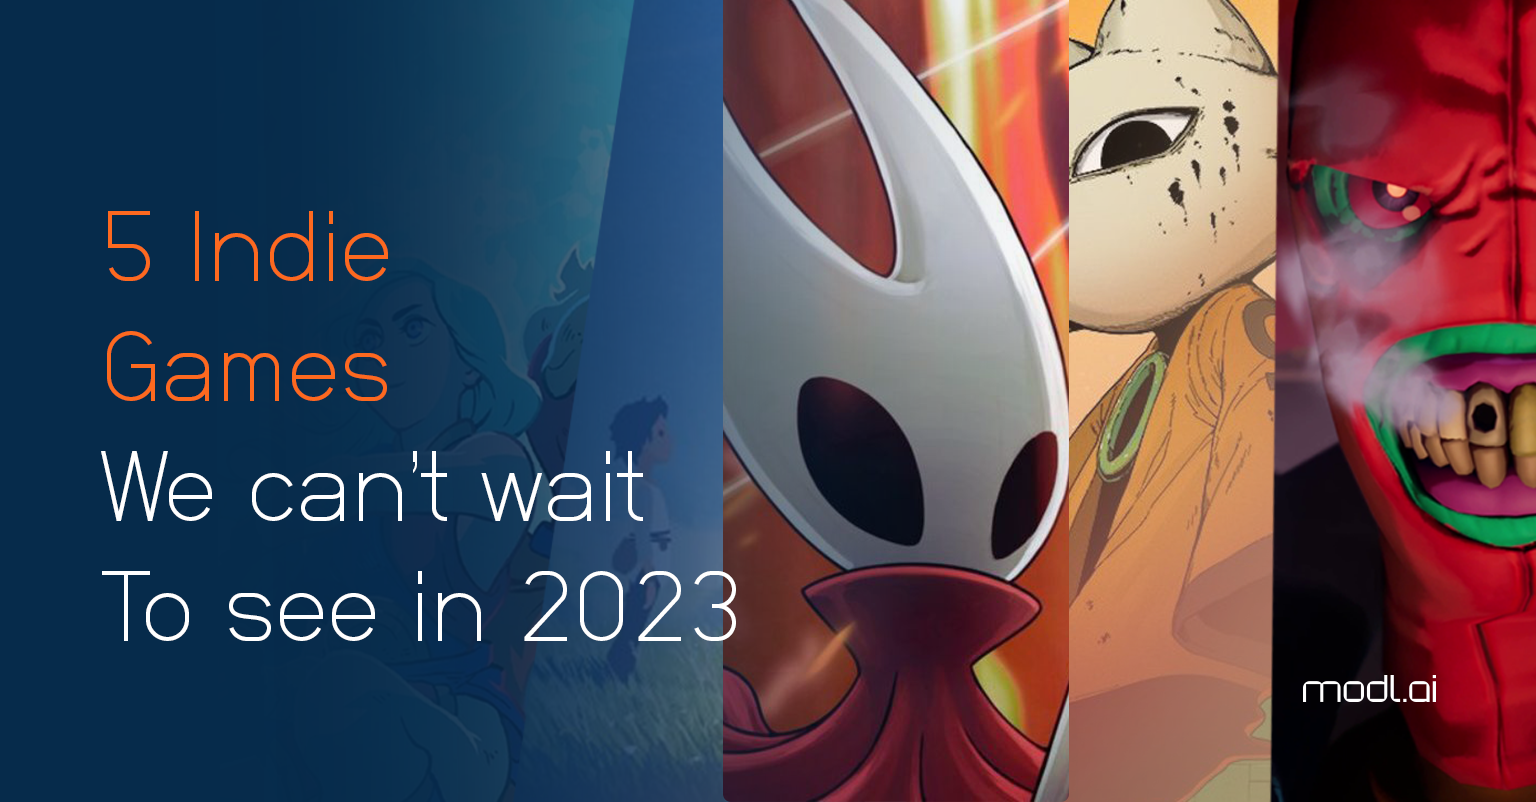 5 Indie Games We Can't To See in 2023